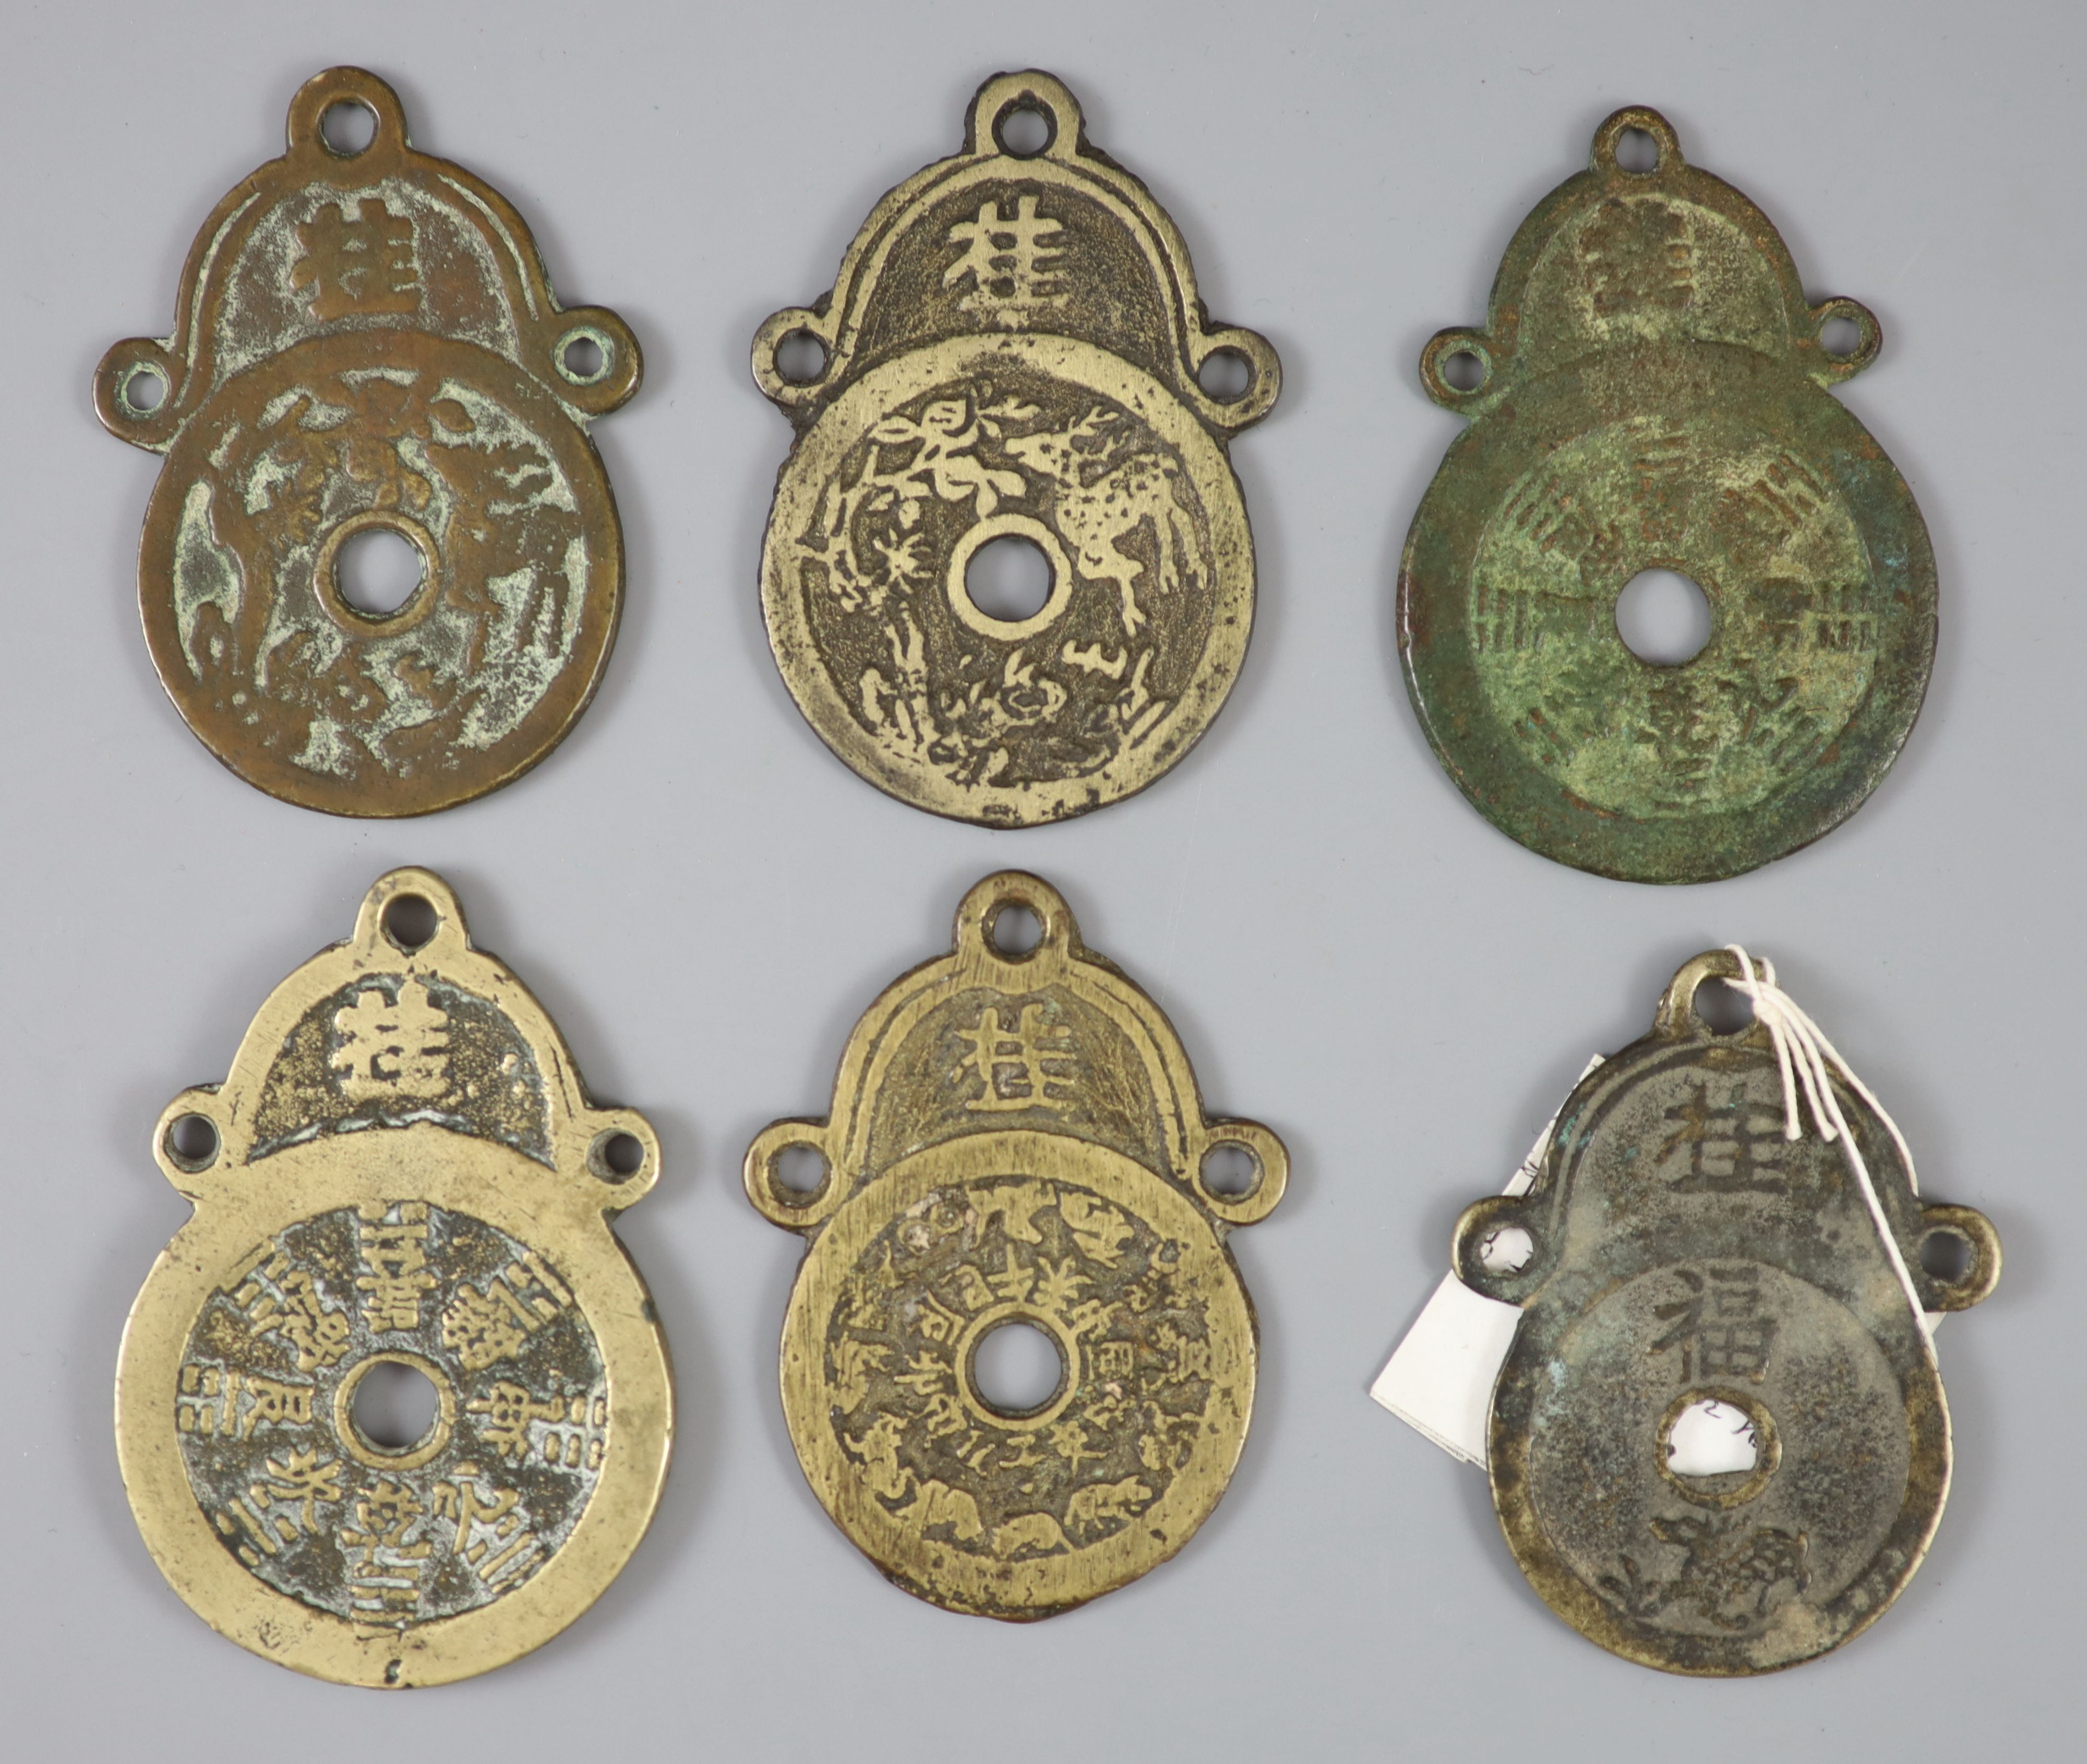 China, 6 large bronze gua pendant charms or amulets, Qing dynasty,